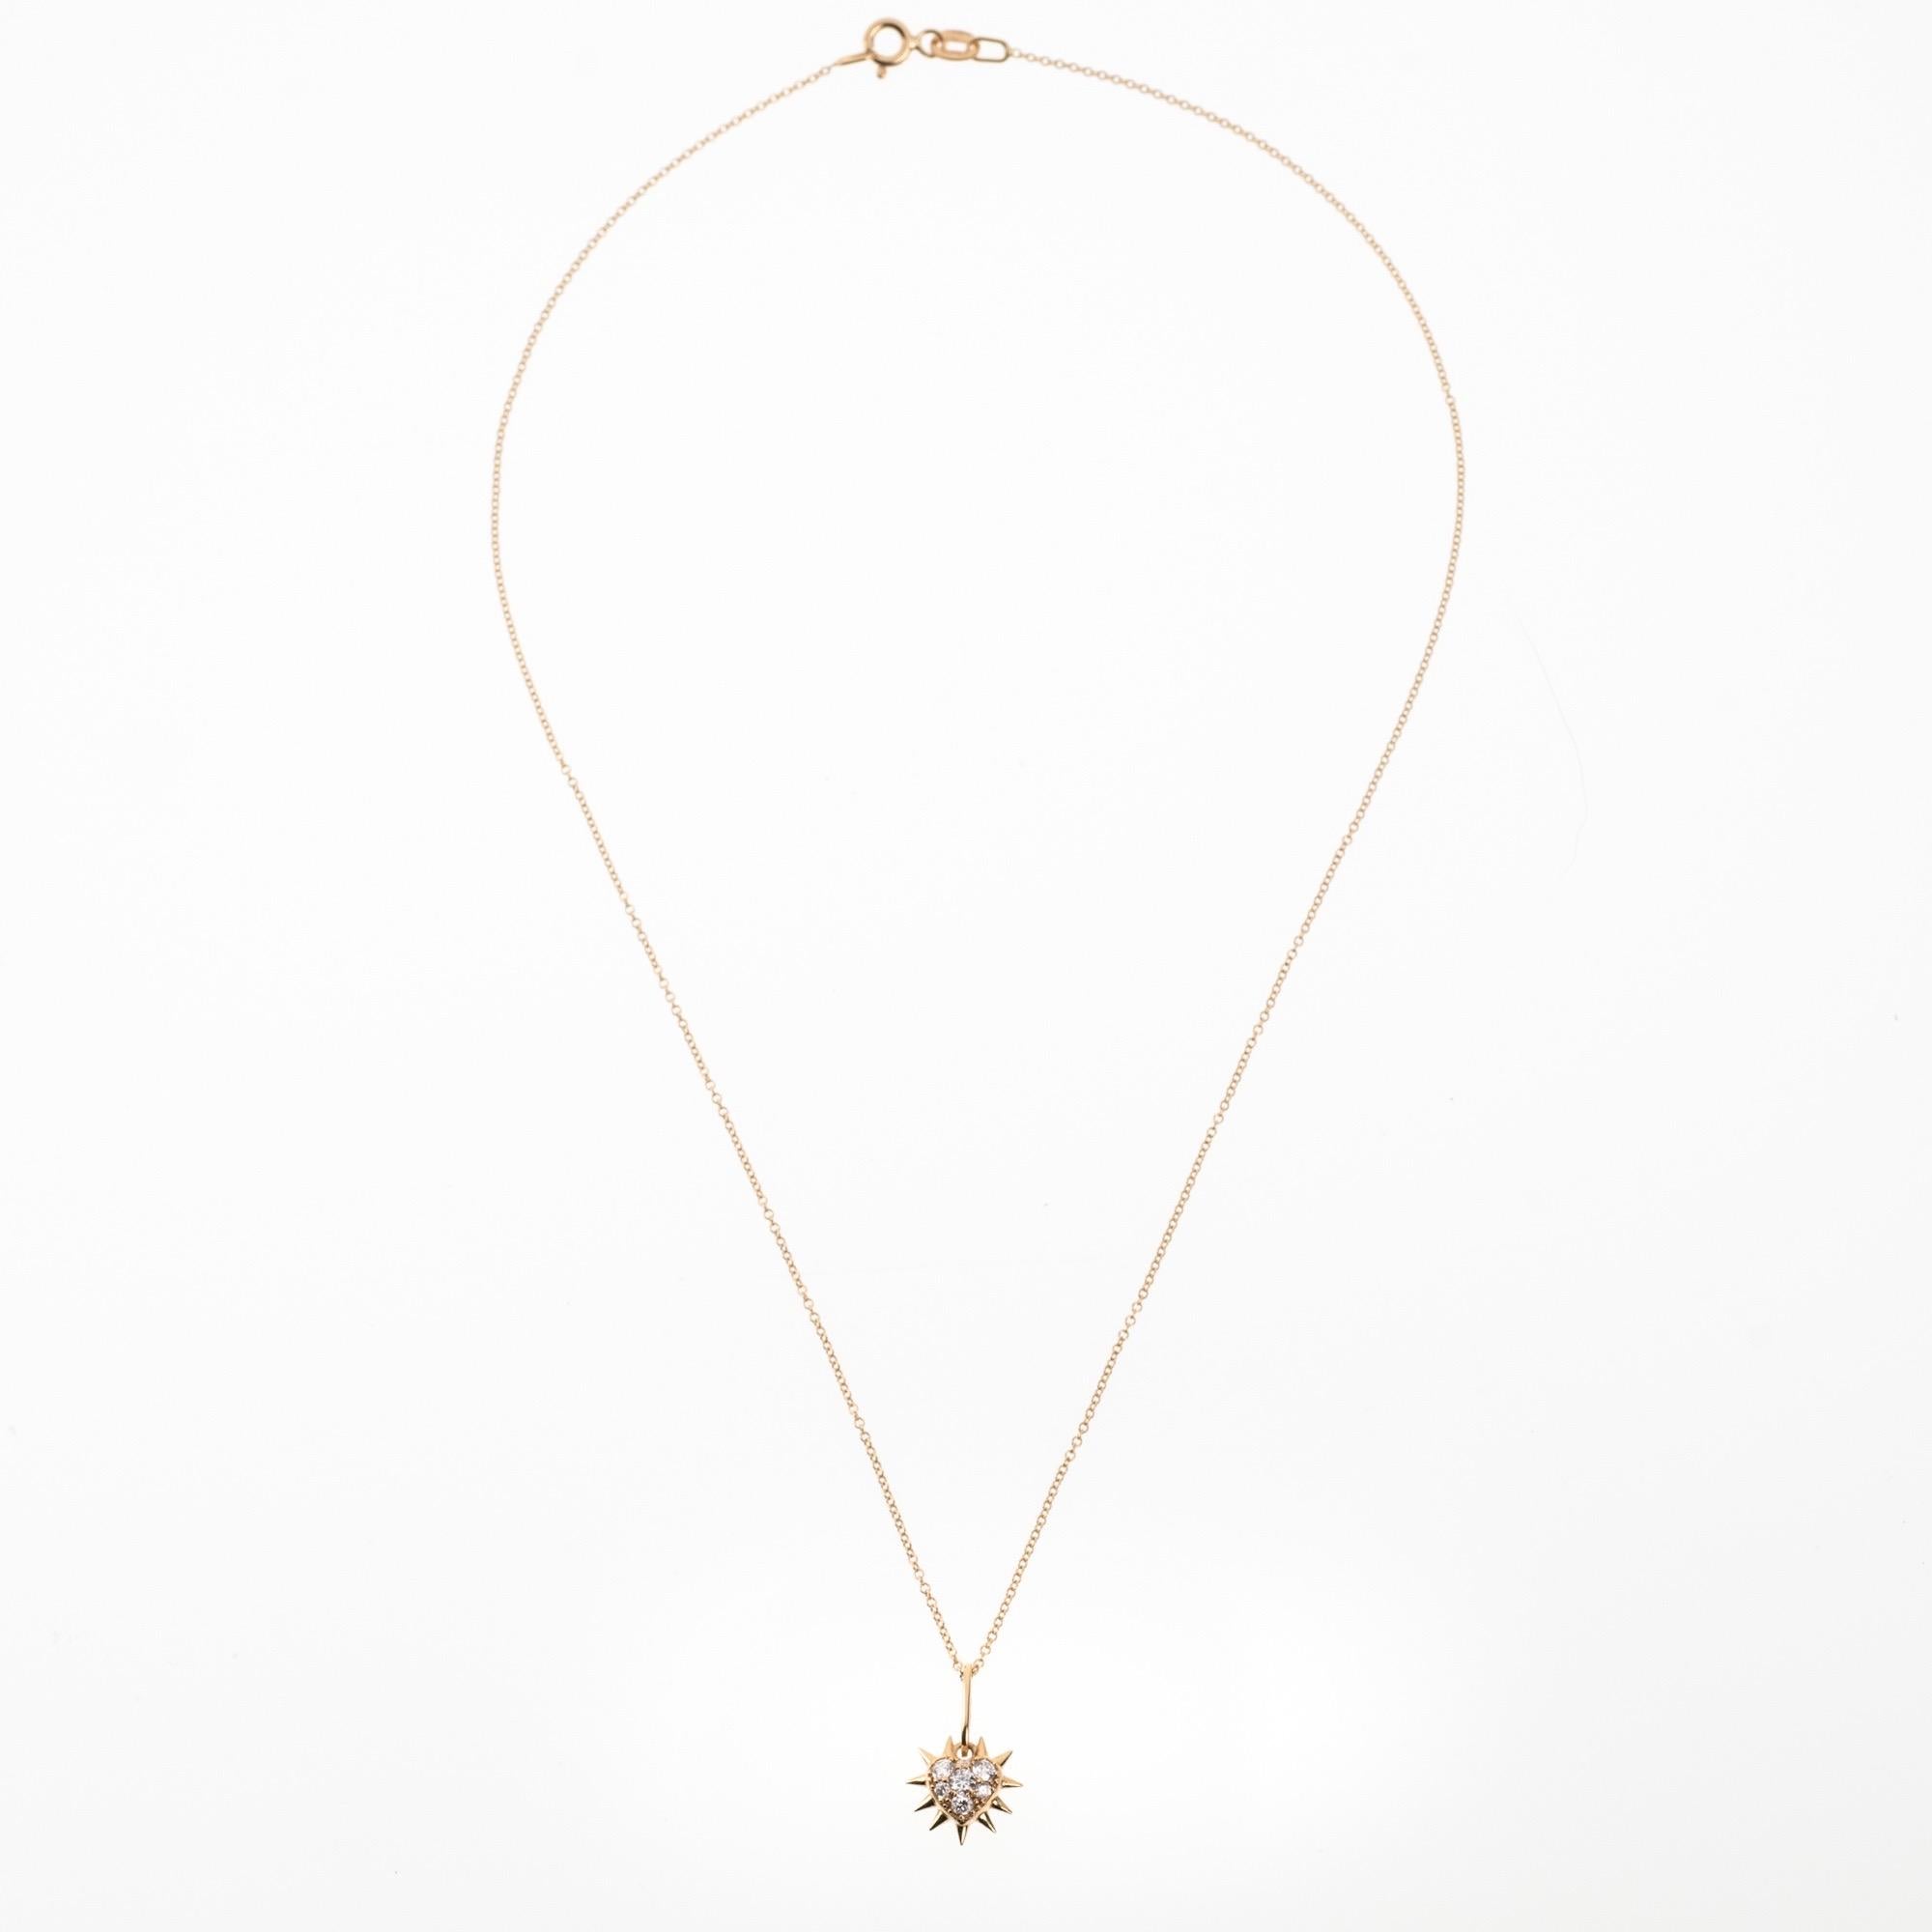 The ‘Thorny heart’ pendant necklace is crafted in 18K gold hallmarked in Cyprus. This charming heart-shaped pendant comes in a highly polished finish and is set with 0.21 Cts of White Diamonds. The pendant can be purchased alone or with a standard